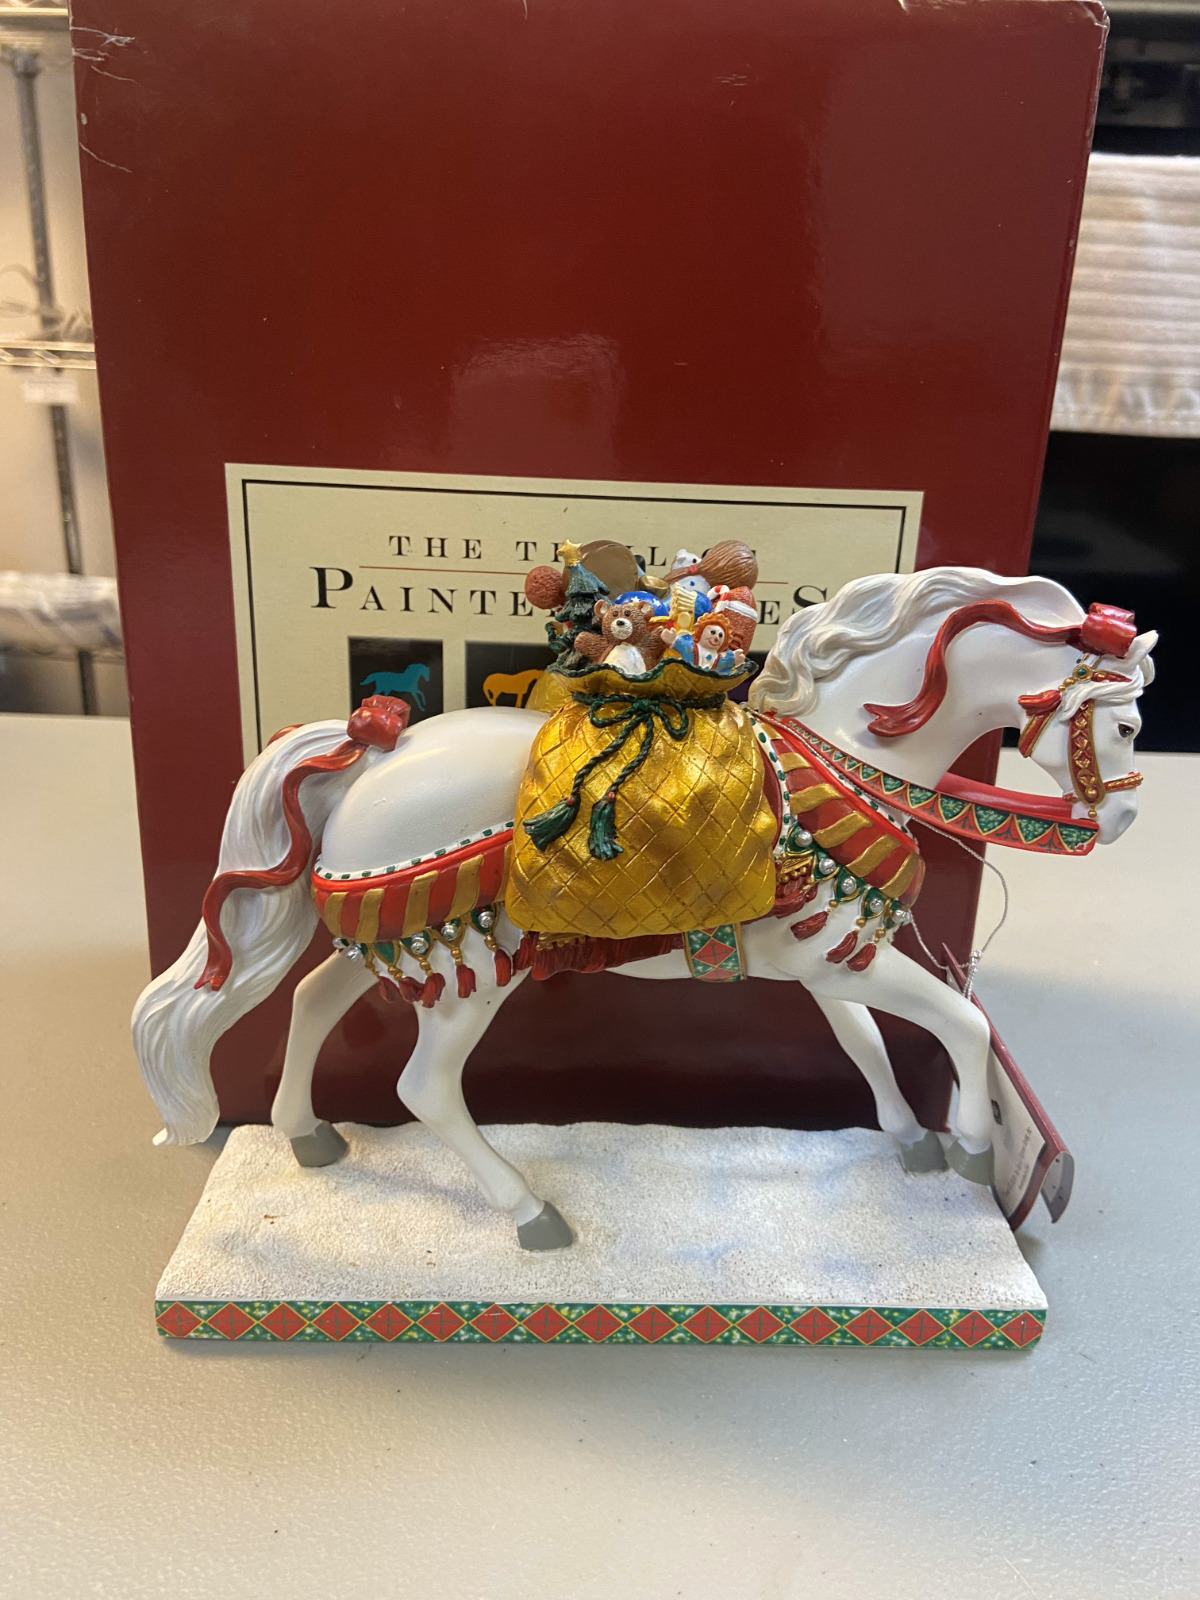 The Trail of Painted Ponies Polar Express 2006 Westland Figurine